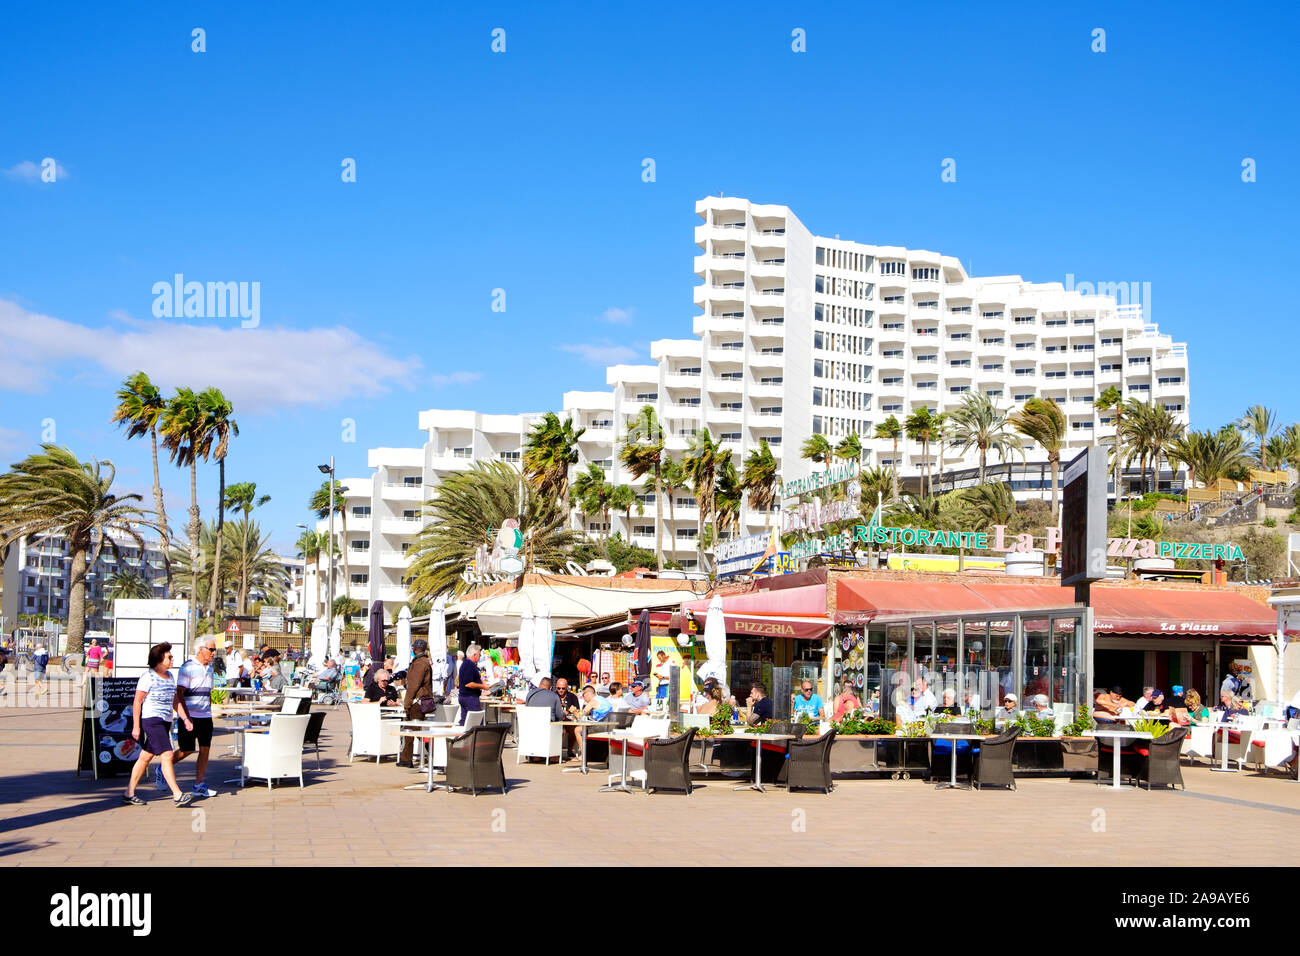 MASPALOMAS, SPAIN - JANUARY 23, 2019: Vacationers at the restaurant terraces of Playa del Ingles, in Maspalomas, in the Canary Islands, Spain, a popul Stock Photo